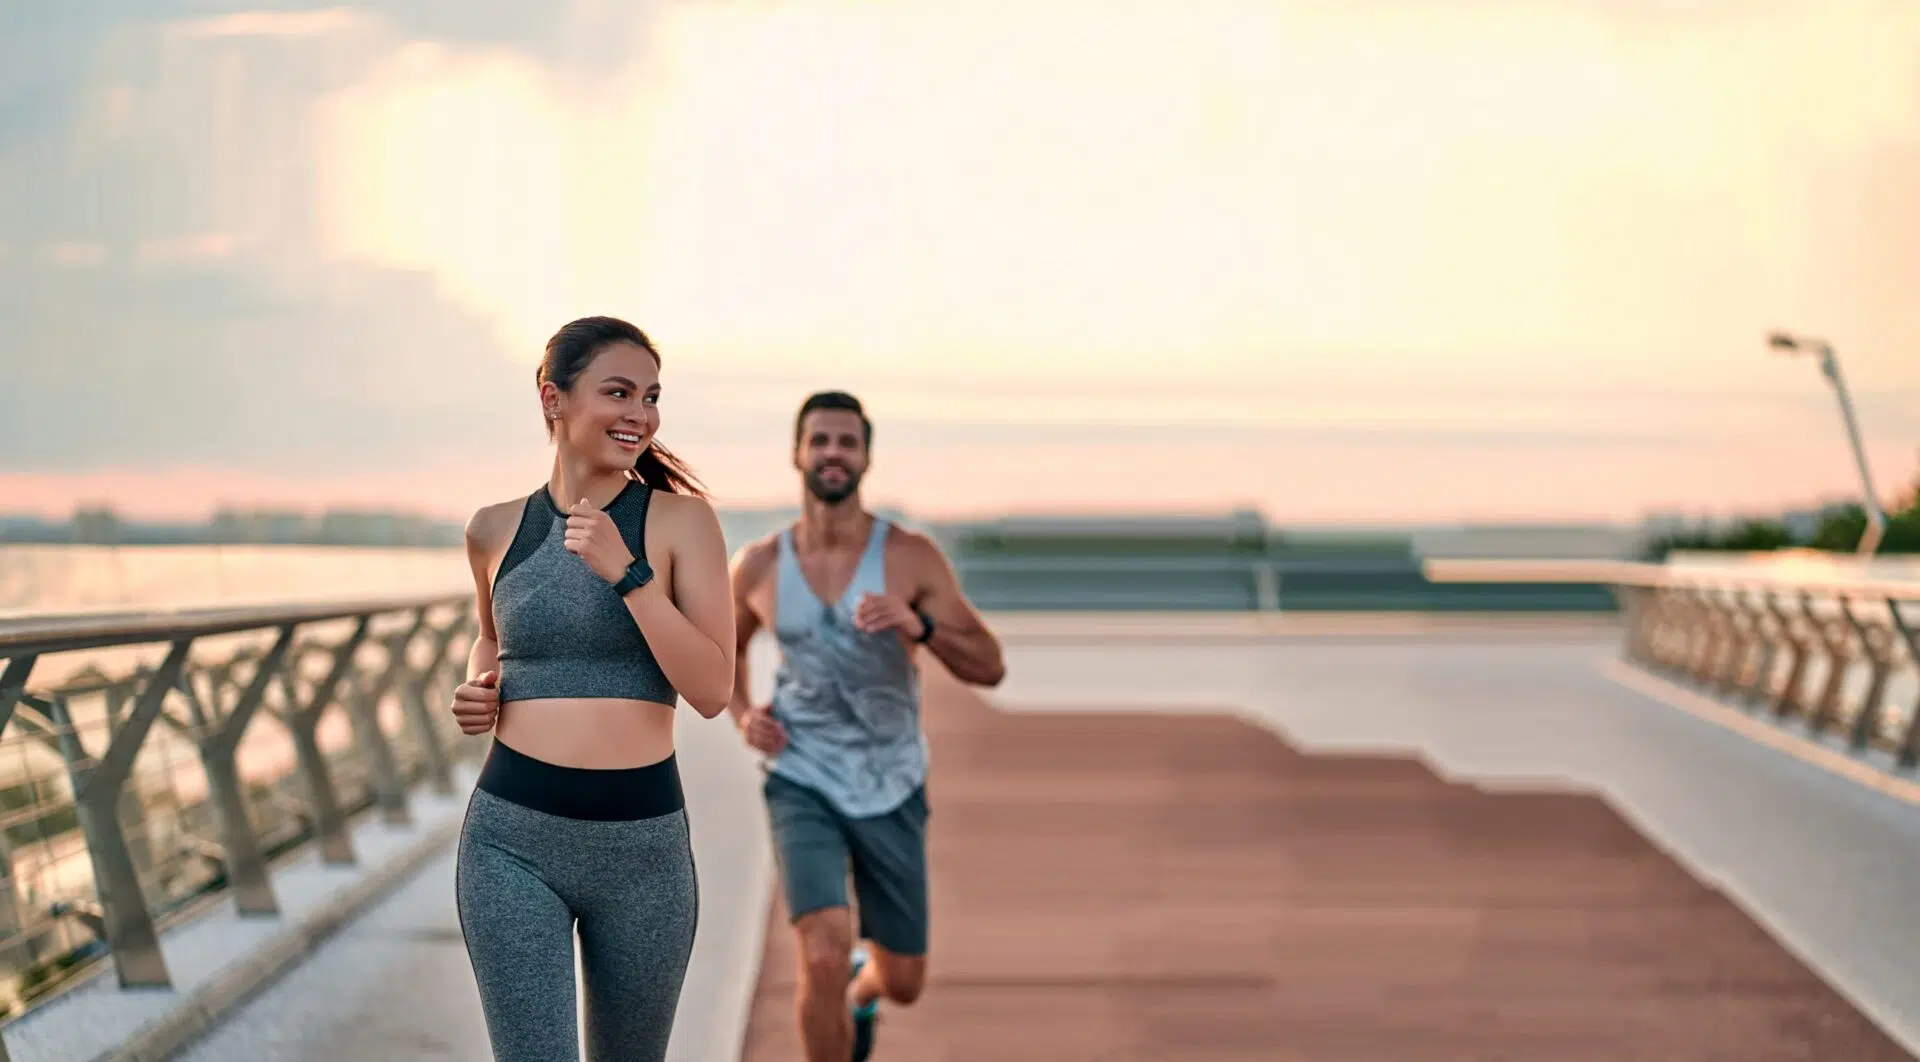 Fit, attractive couple running on a pier with the sun setting behind them to model Wellnessesity treatment benefits.